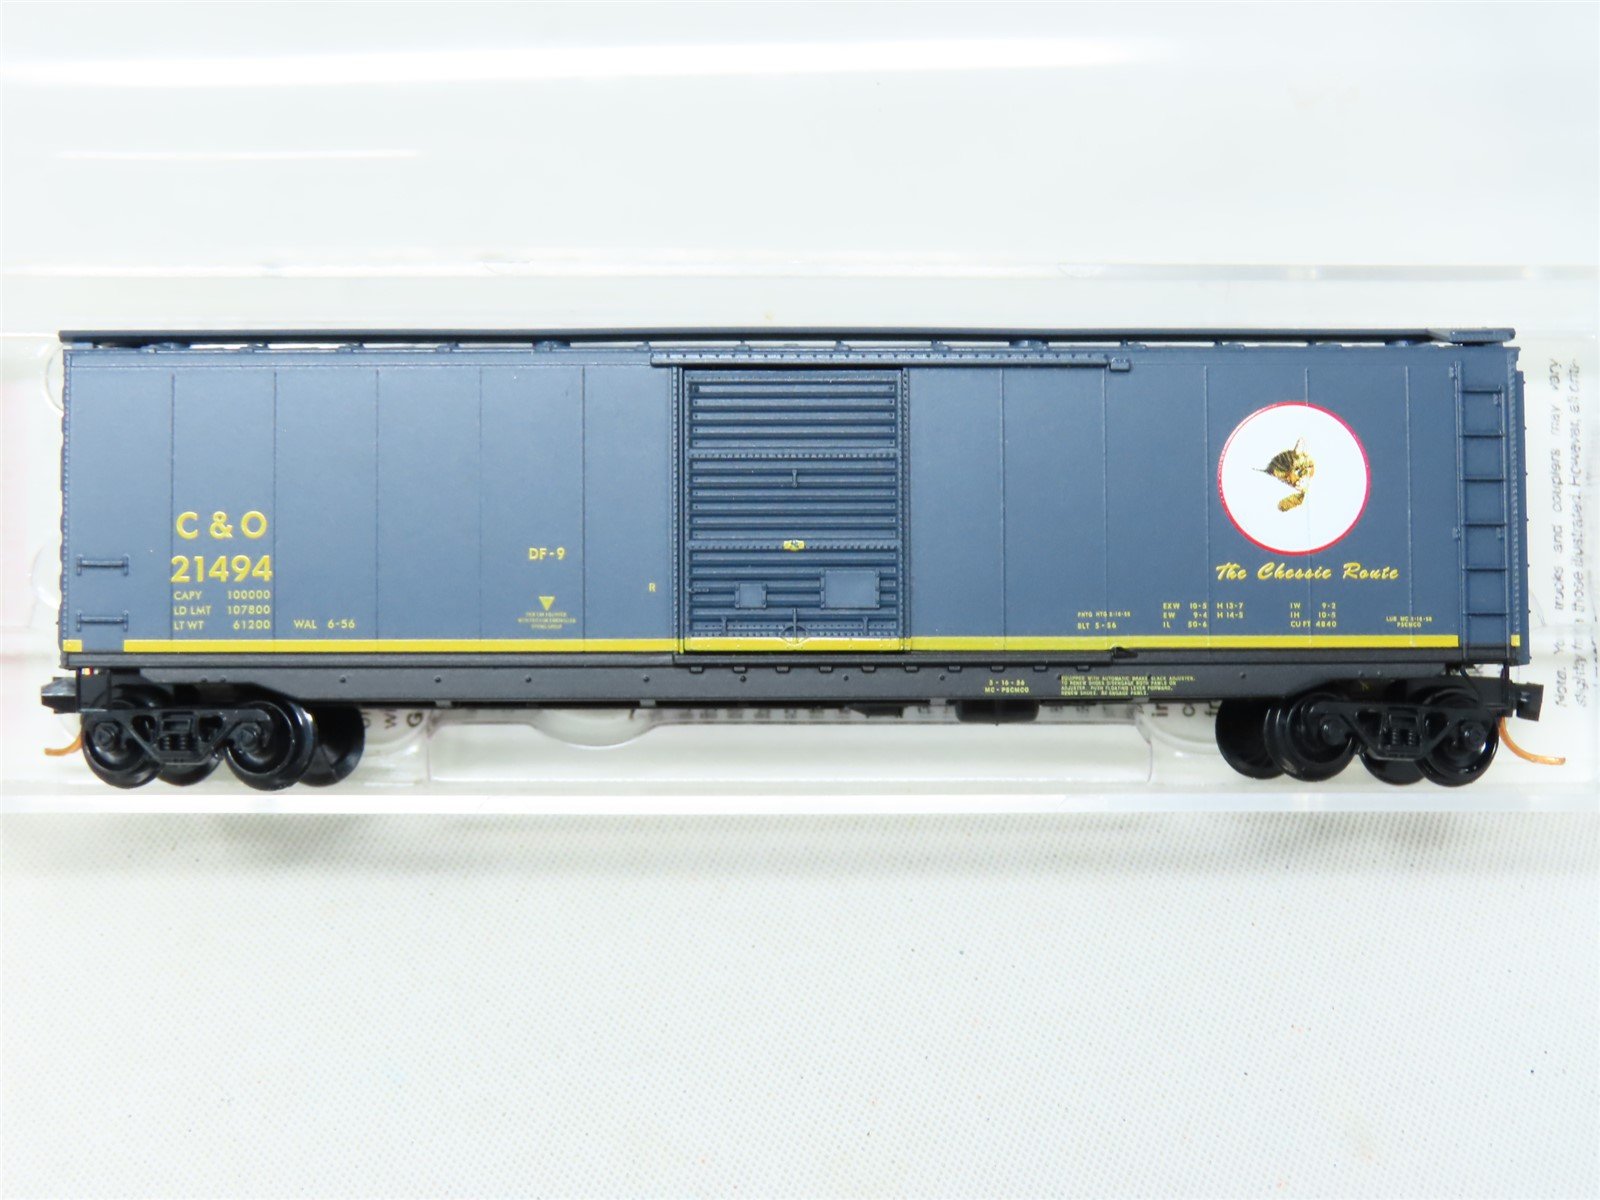 N Scale Micro-Trains MTL 03100076 C&O "The Chessie Route" 50' Boxcar #21494